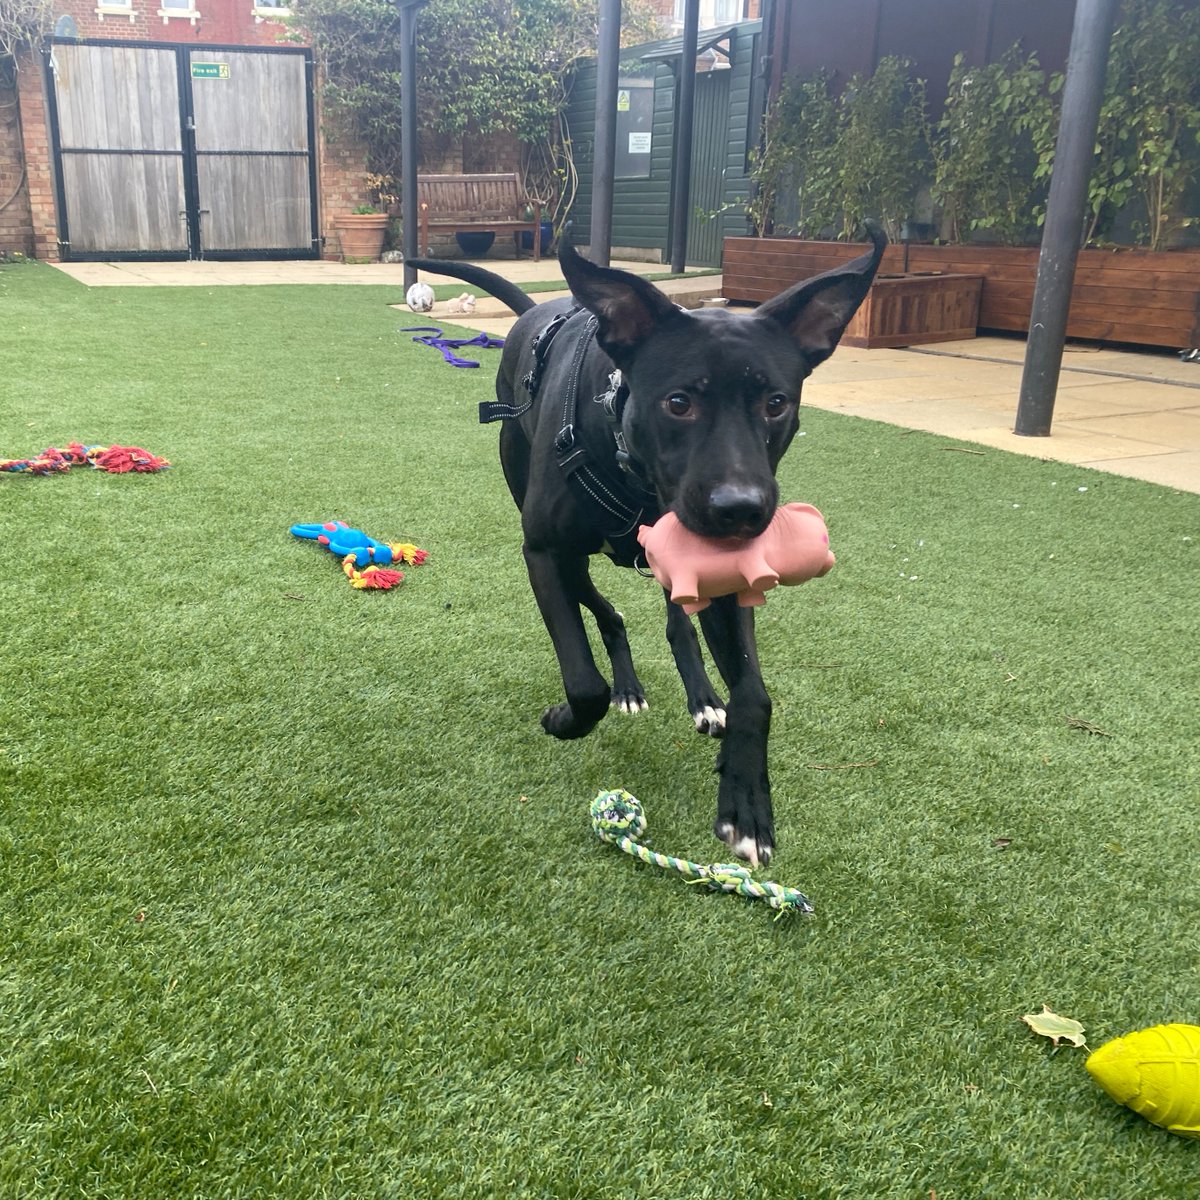 We caught Stitch running away from Monday morning with his squeaky pig toy in tow! 🤭 Who else can relate? 🐾 Stitch is crossing his paws for some adoption applications this week so he can take a step closer to finding his forever home. 💜 themayhew.org/dogs/stitch/.